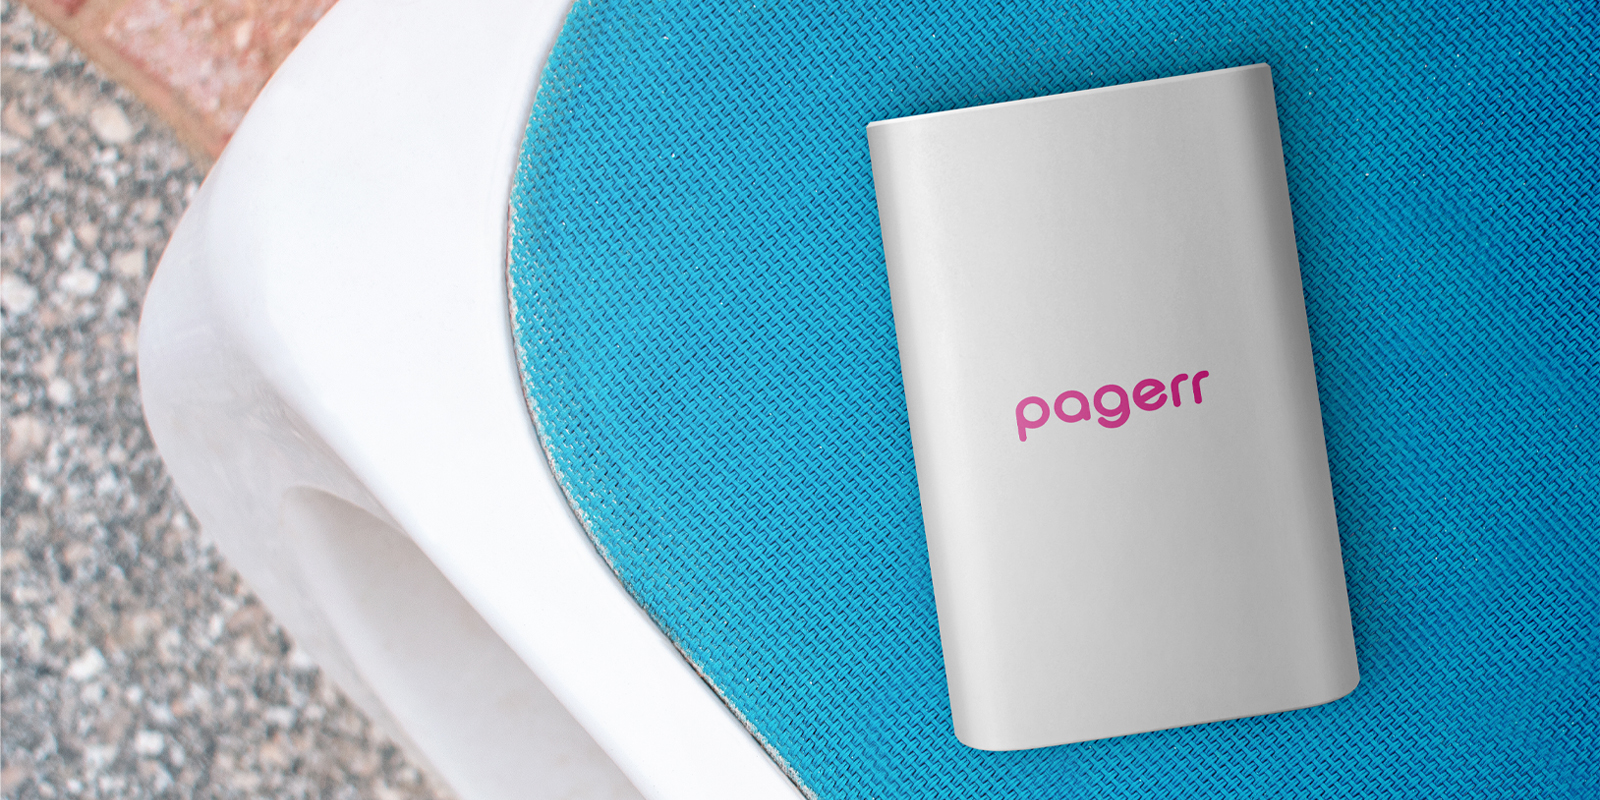 Chargers & power banks in Rockingham - Print with Pagerr